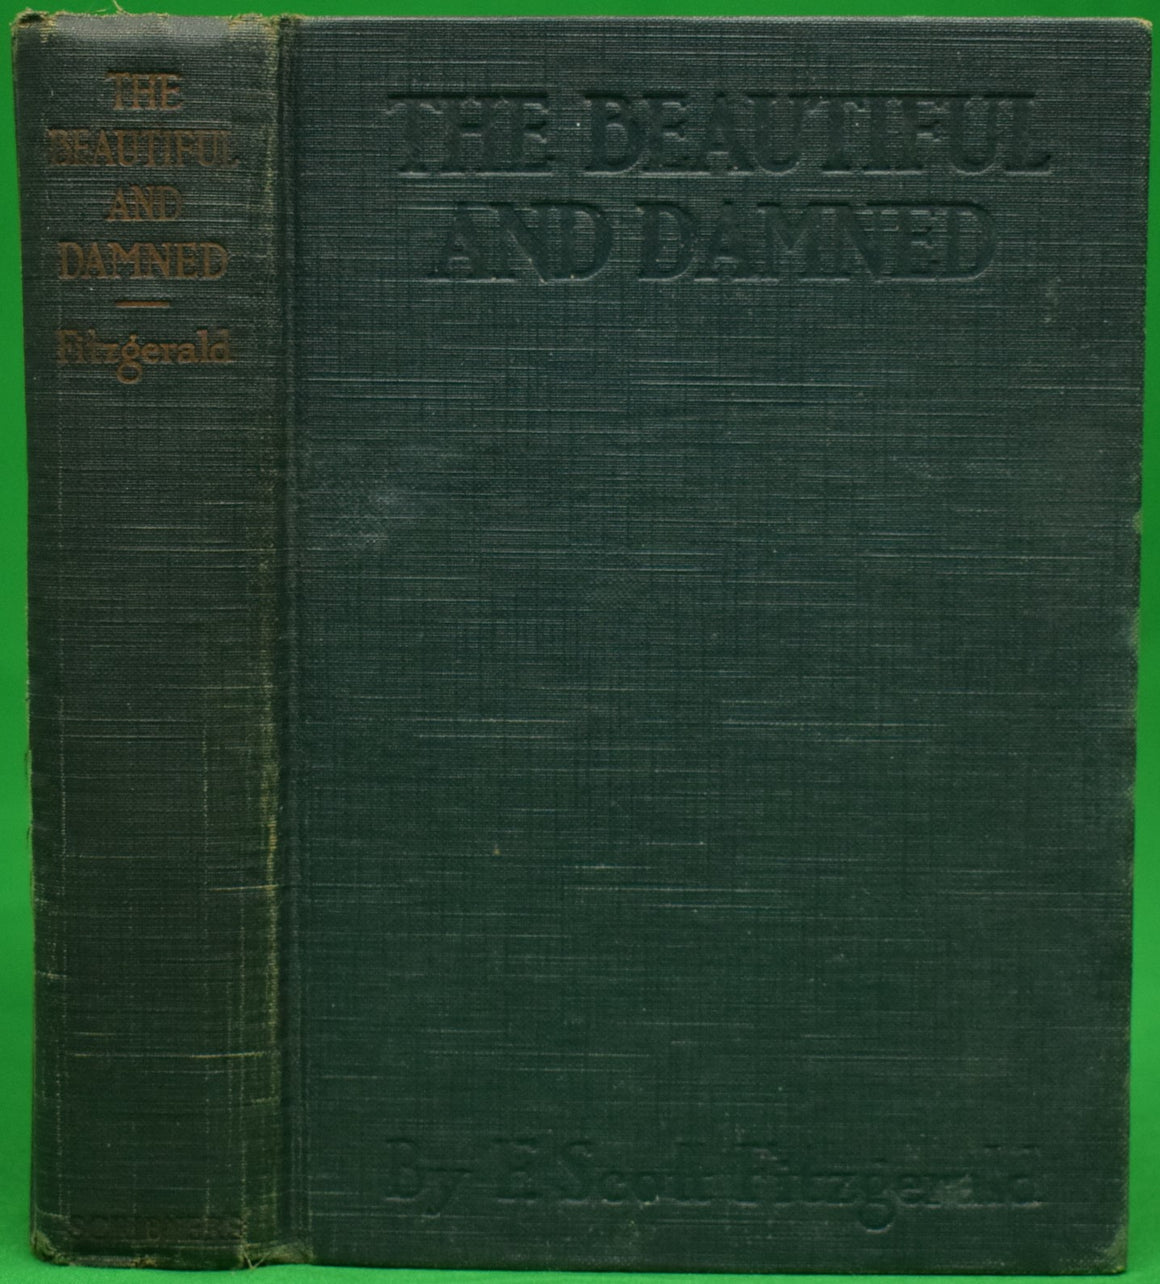 "The Beautiful And Damned" FITZGERALD, F. Scott